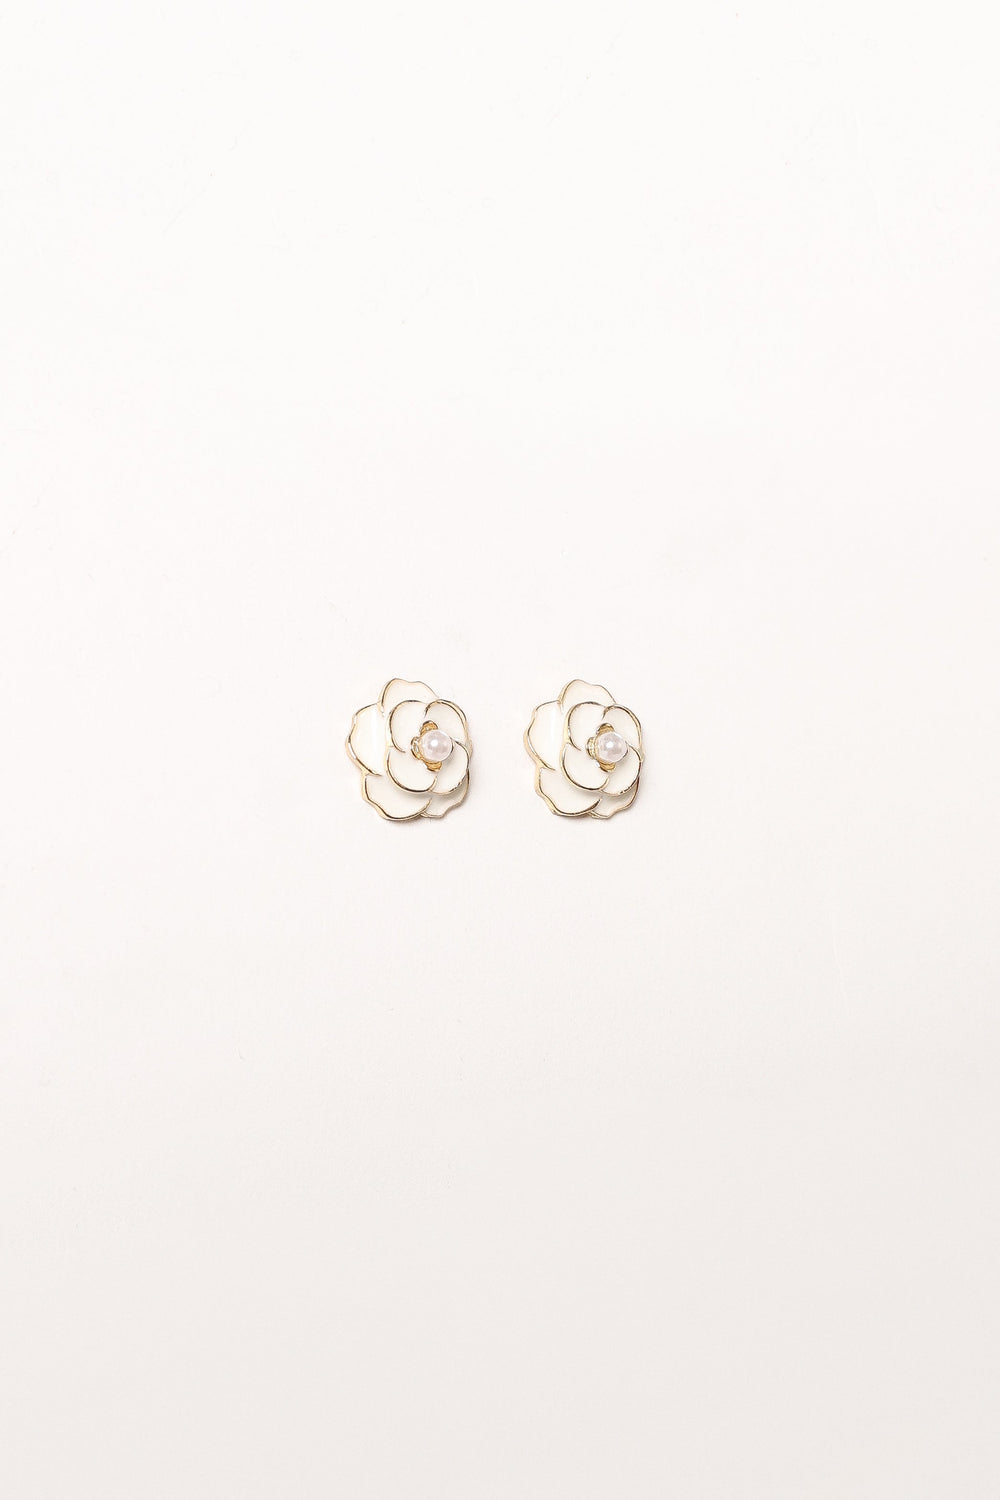 Petal and Pup USA ACCESSORIES Reina Flower Earrings - Gold White One Size